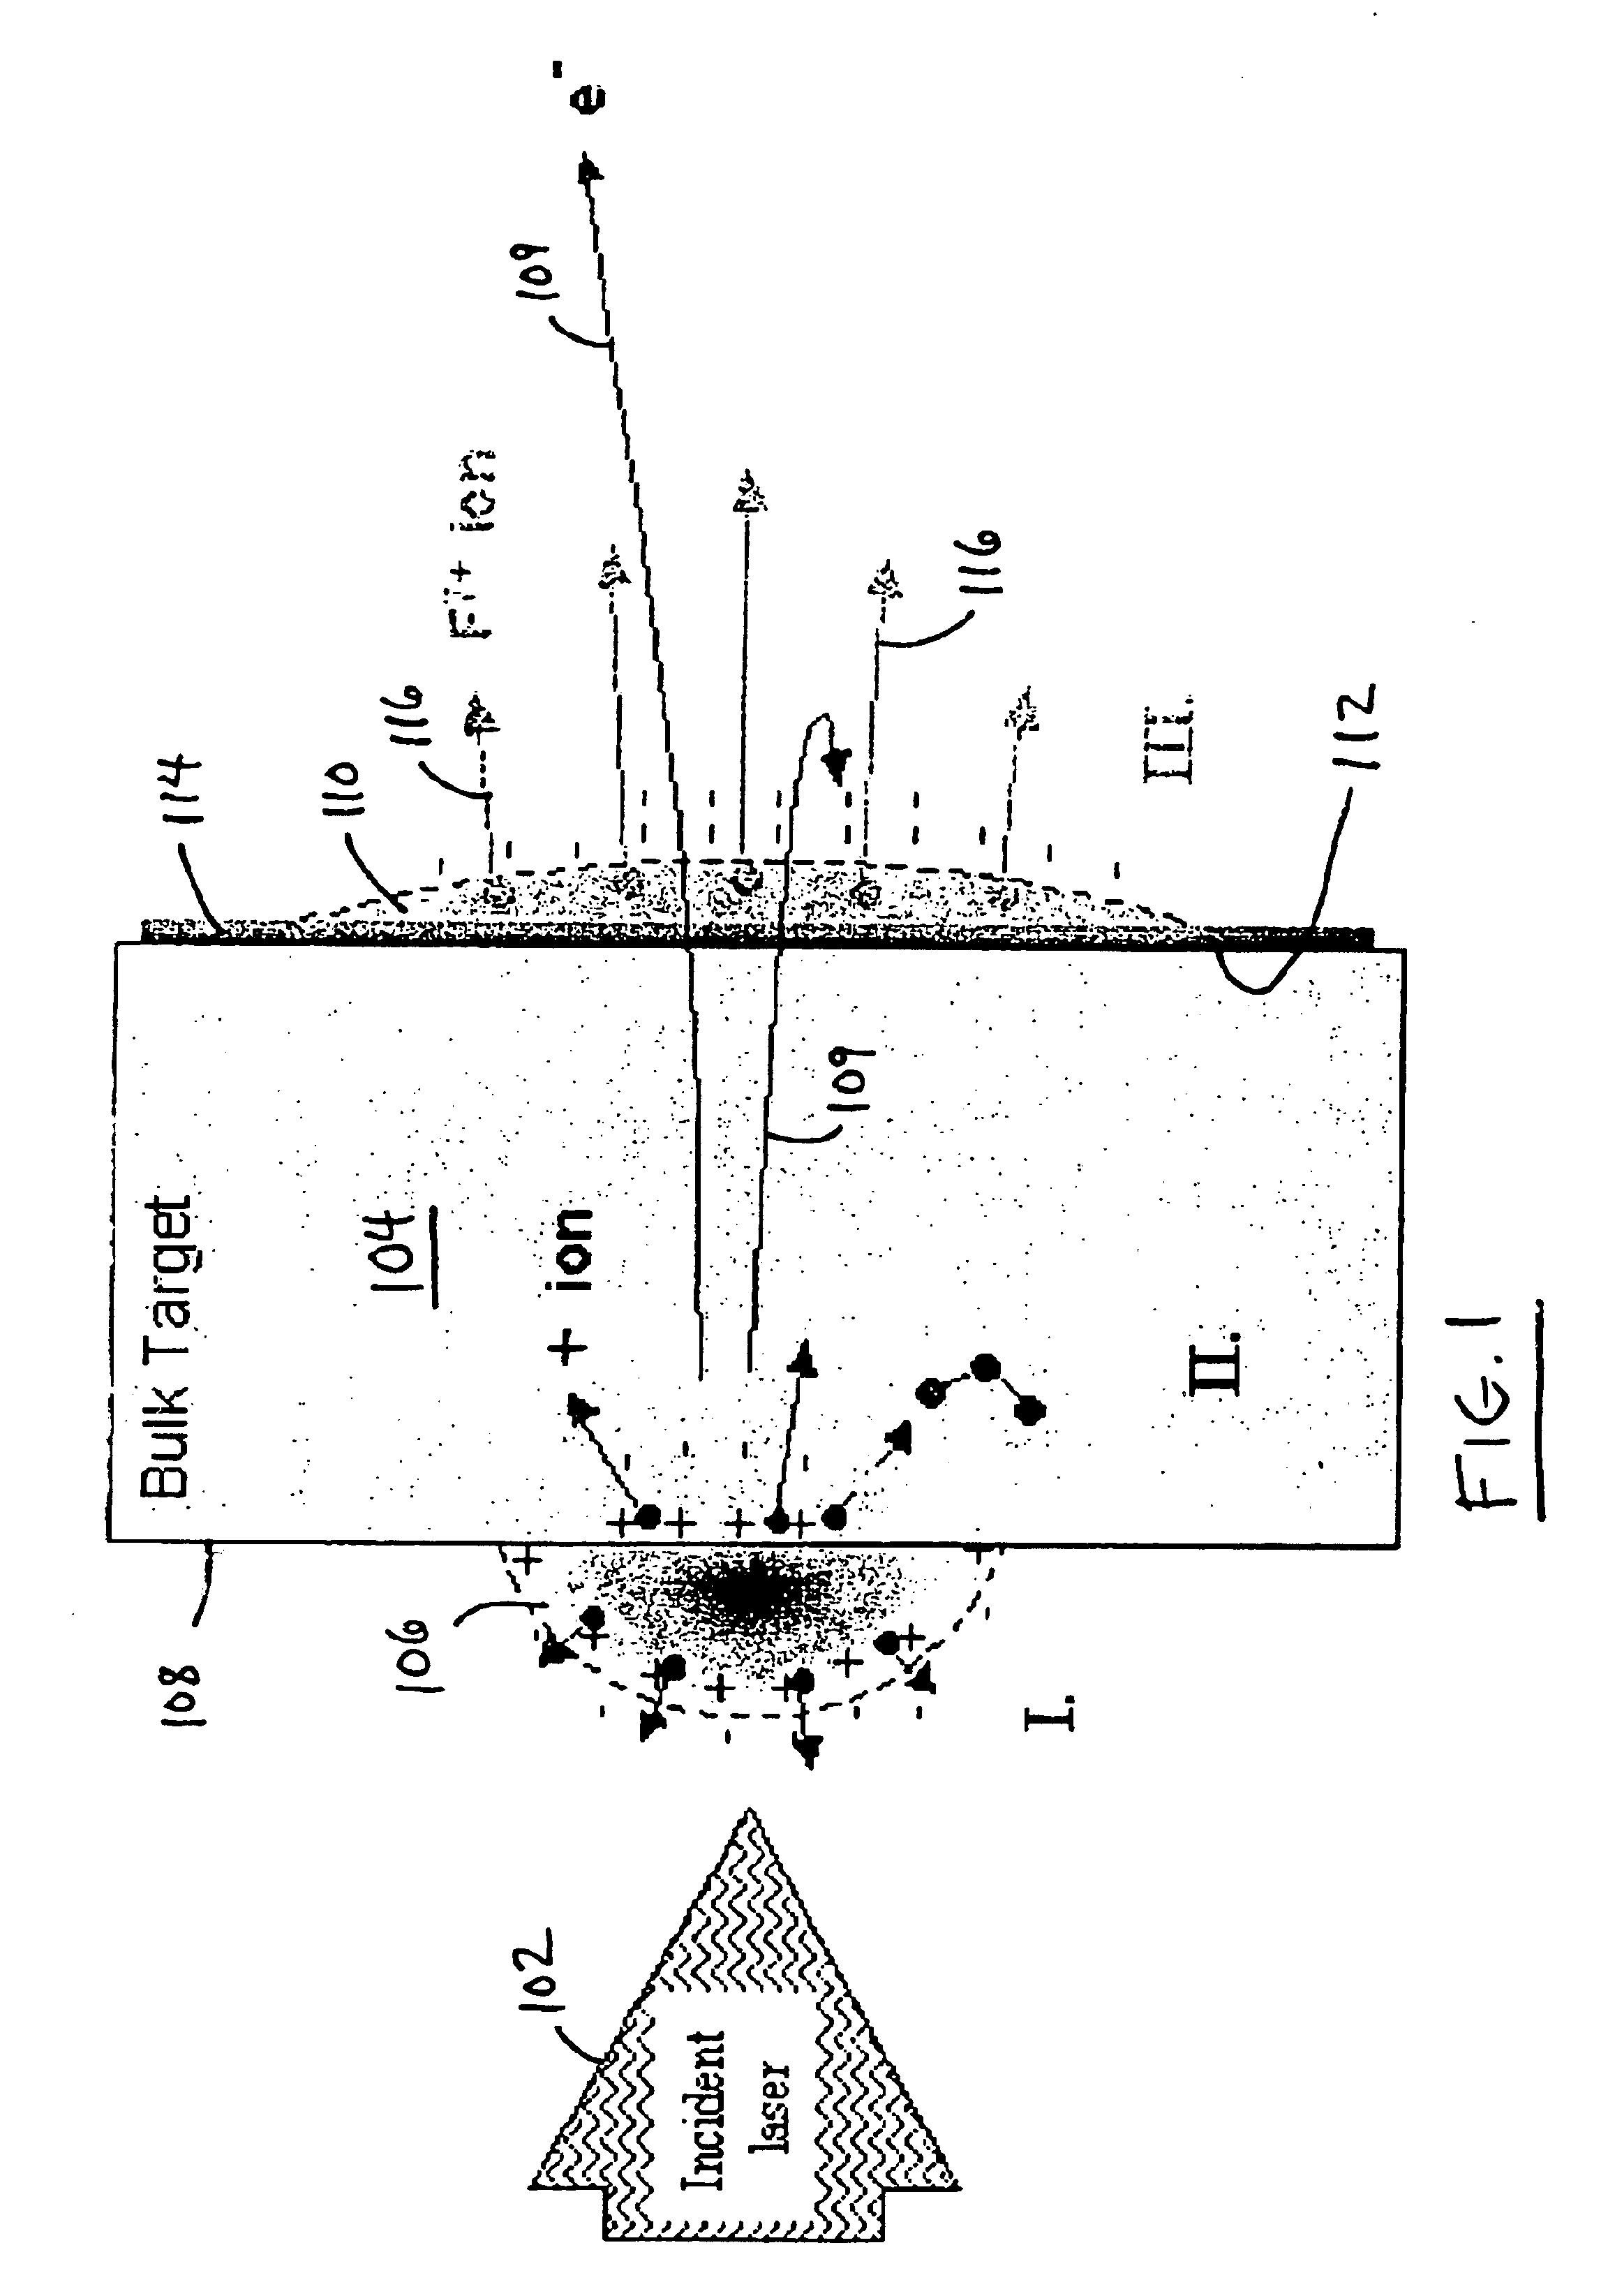 Method and apparatus for nanometer-scale focusing and patterning of ultra-low emittance, multi-MeV proton and ion beams from a laser ion diode